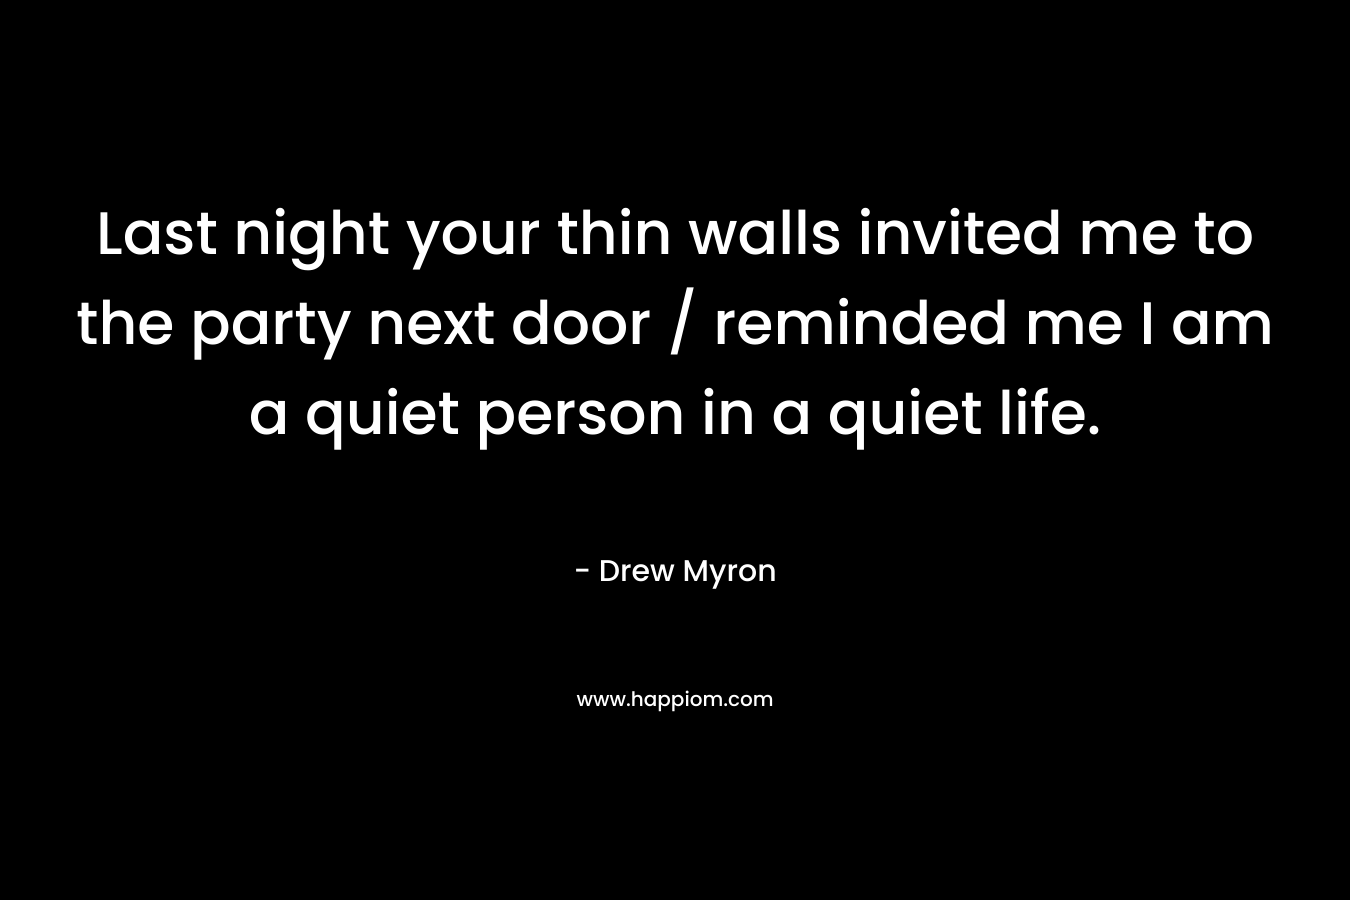 Last night your thin walls invited me to the party next door / reminded me I am a quiet person in a quiet life.